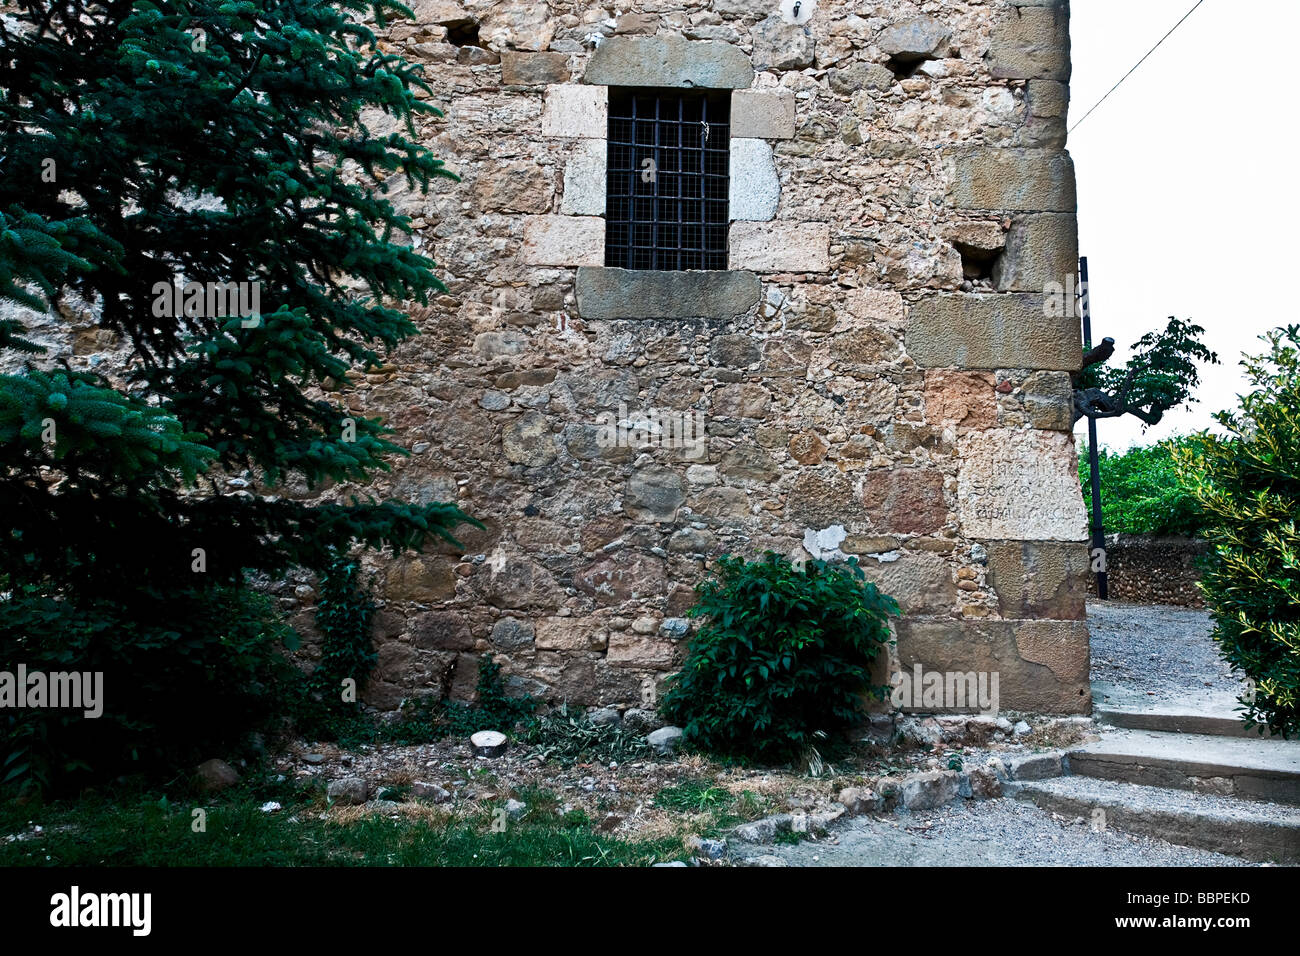 Old building in the village of Llado, Northern Spain. Stock Photo